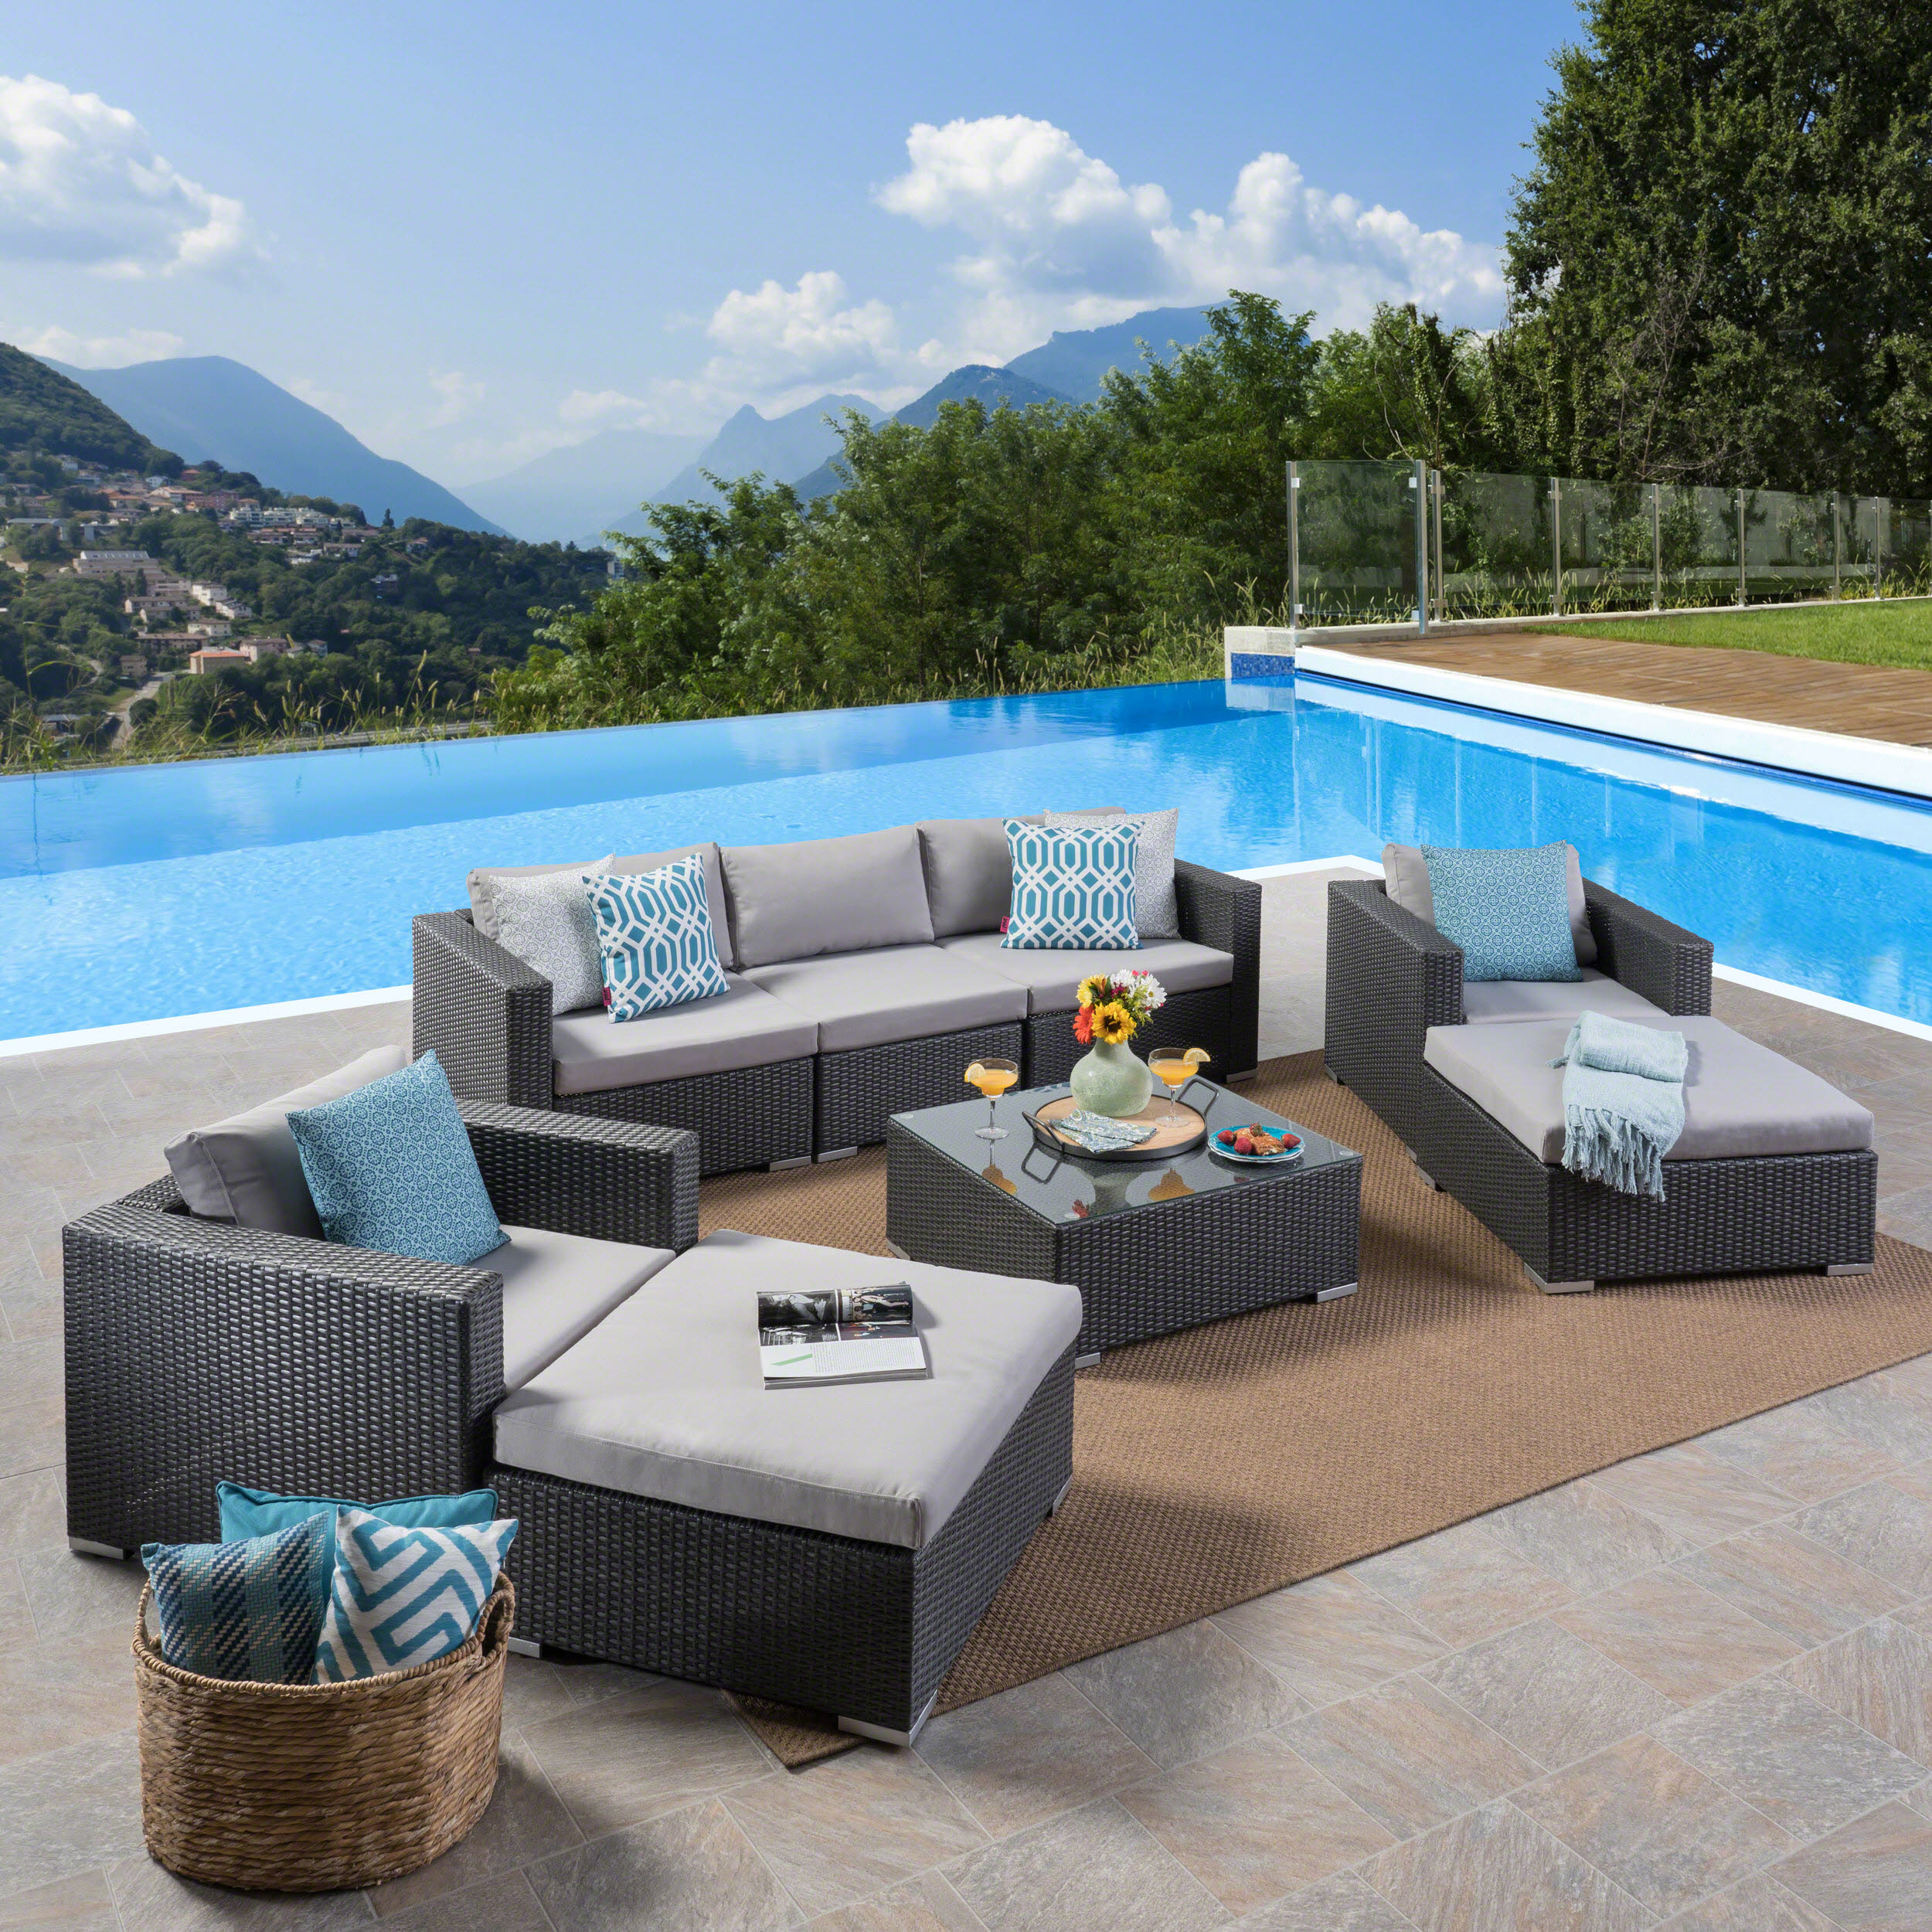 Favioal Outdoor 5 Seater Wicker Chat Set with Aluminum Frame and Cushions